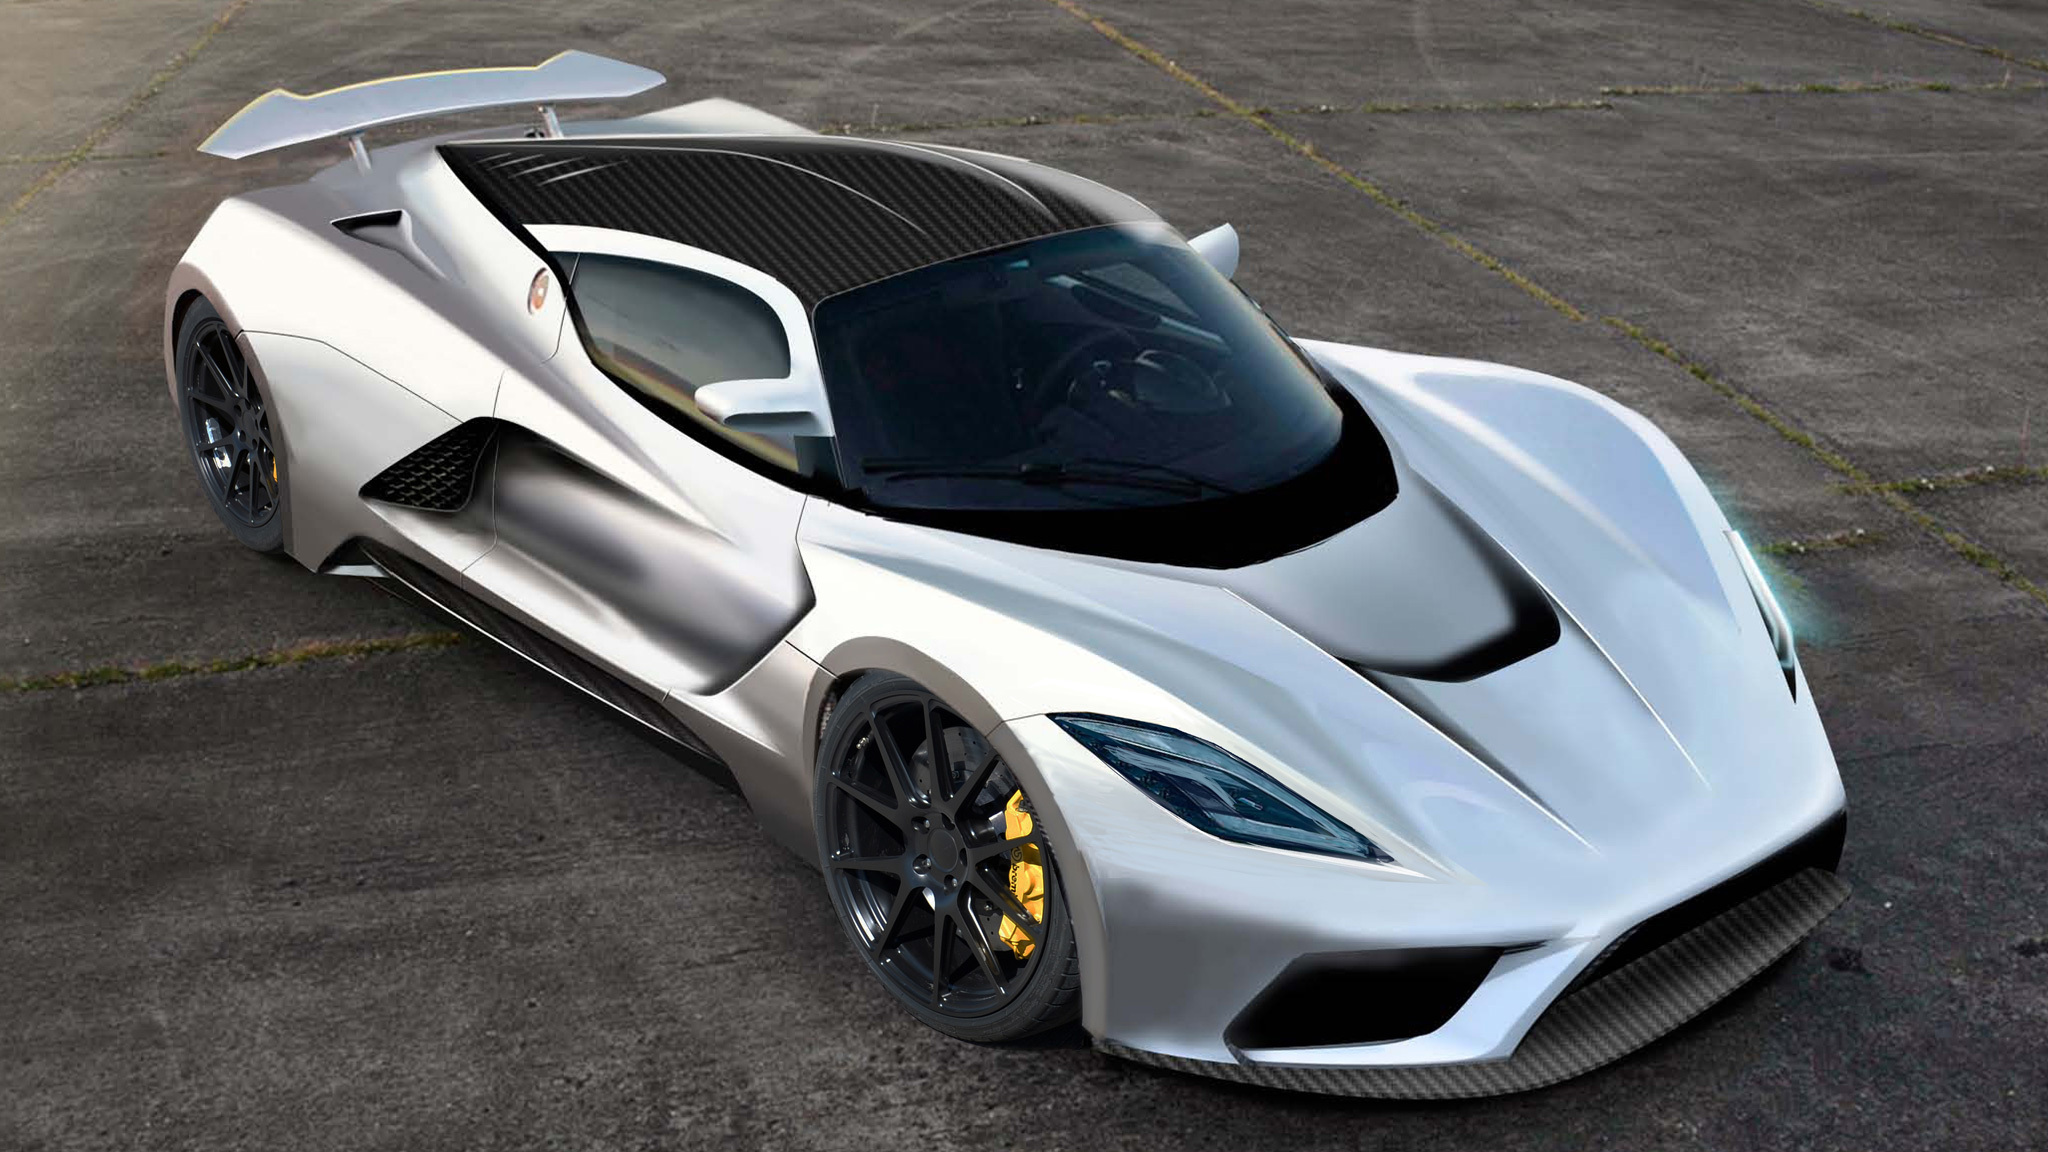 2016 Hennessey Venom F5 Hd - Hennessey Venom F5 Hd , HD Wallpaper & Backgrounds